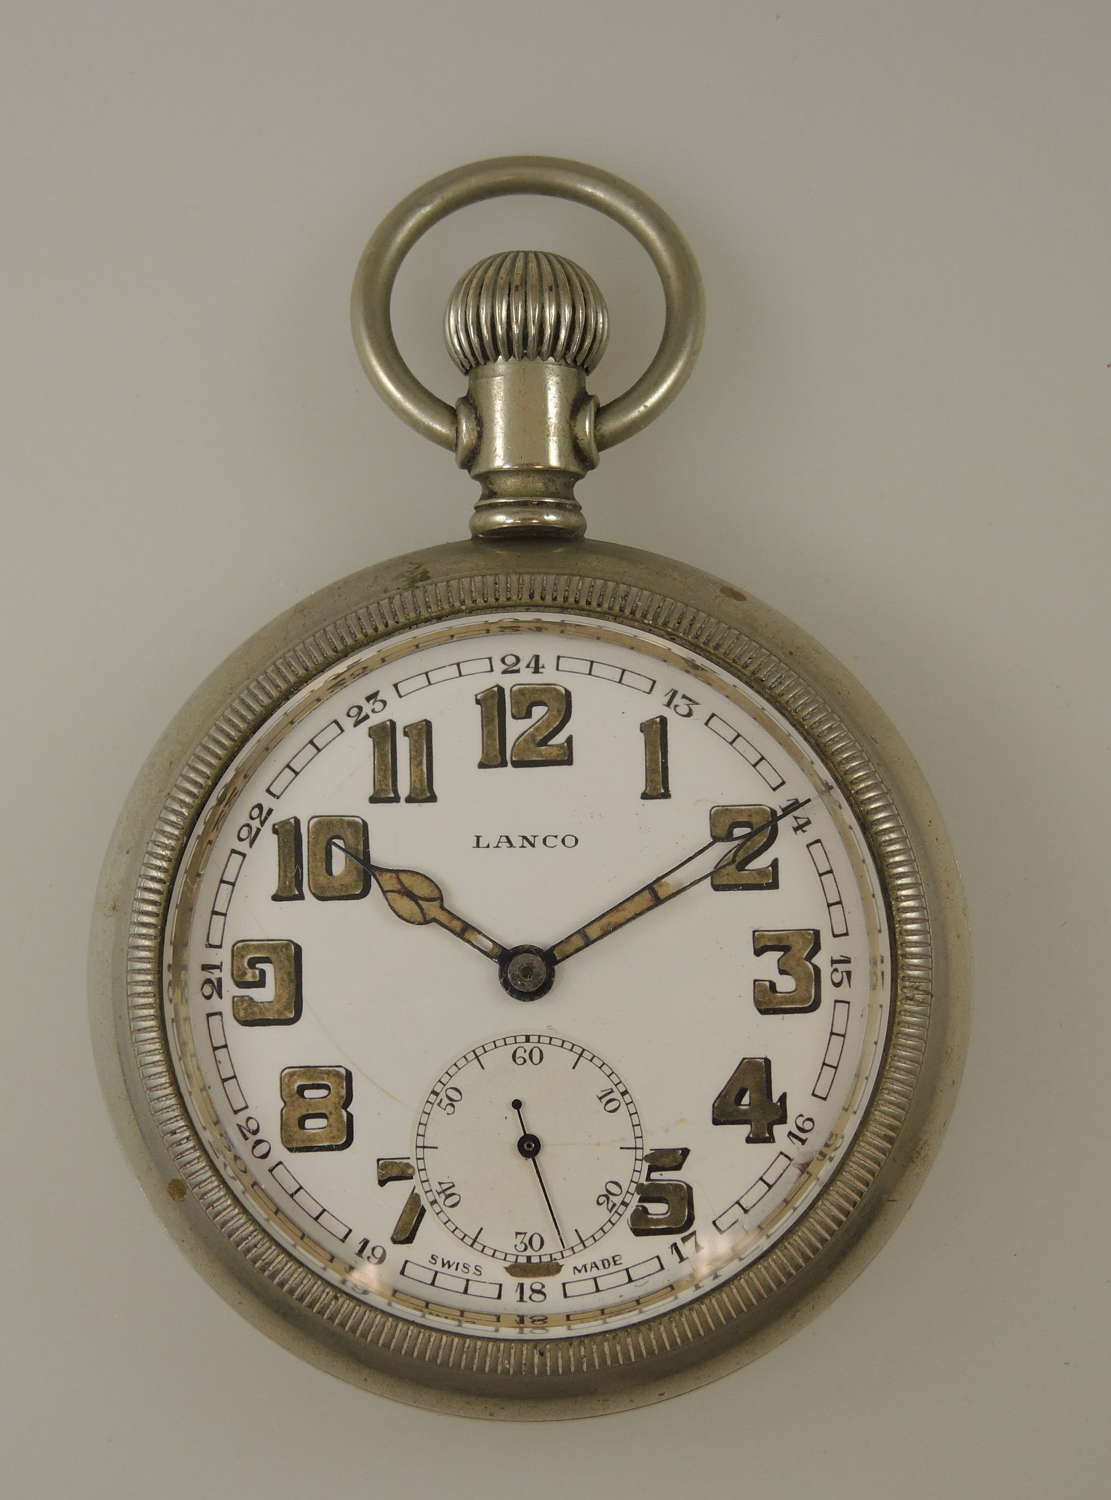 Rare South African military pocket watch by Lanco c1940